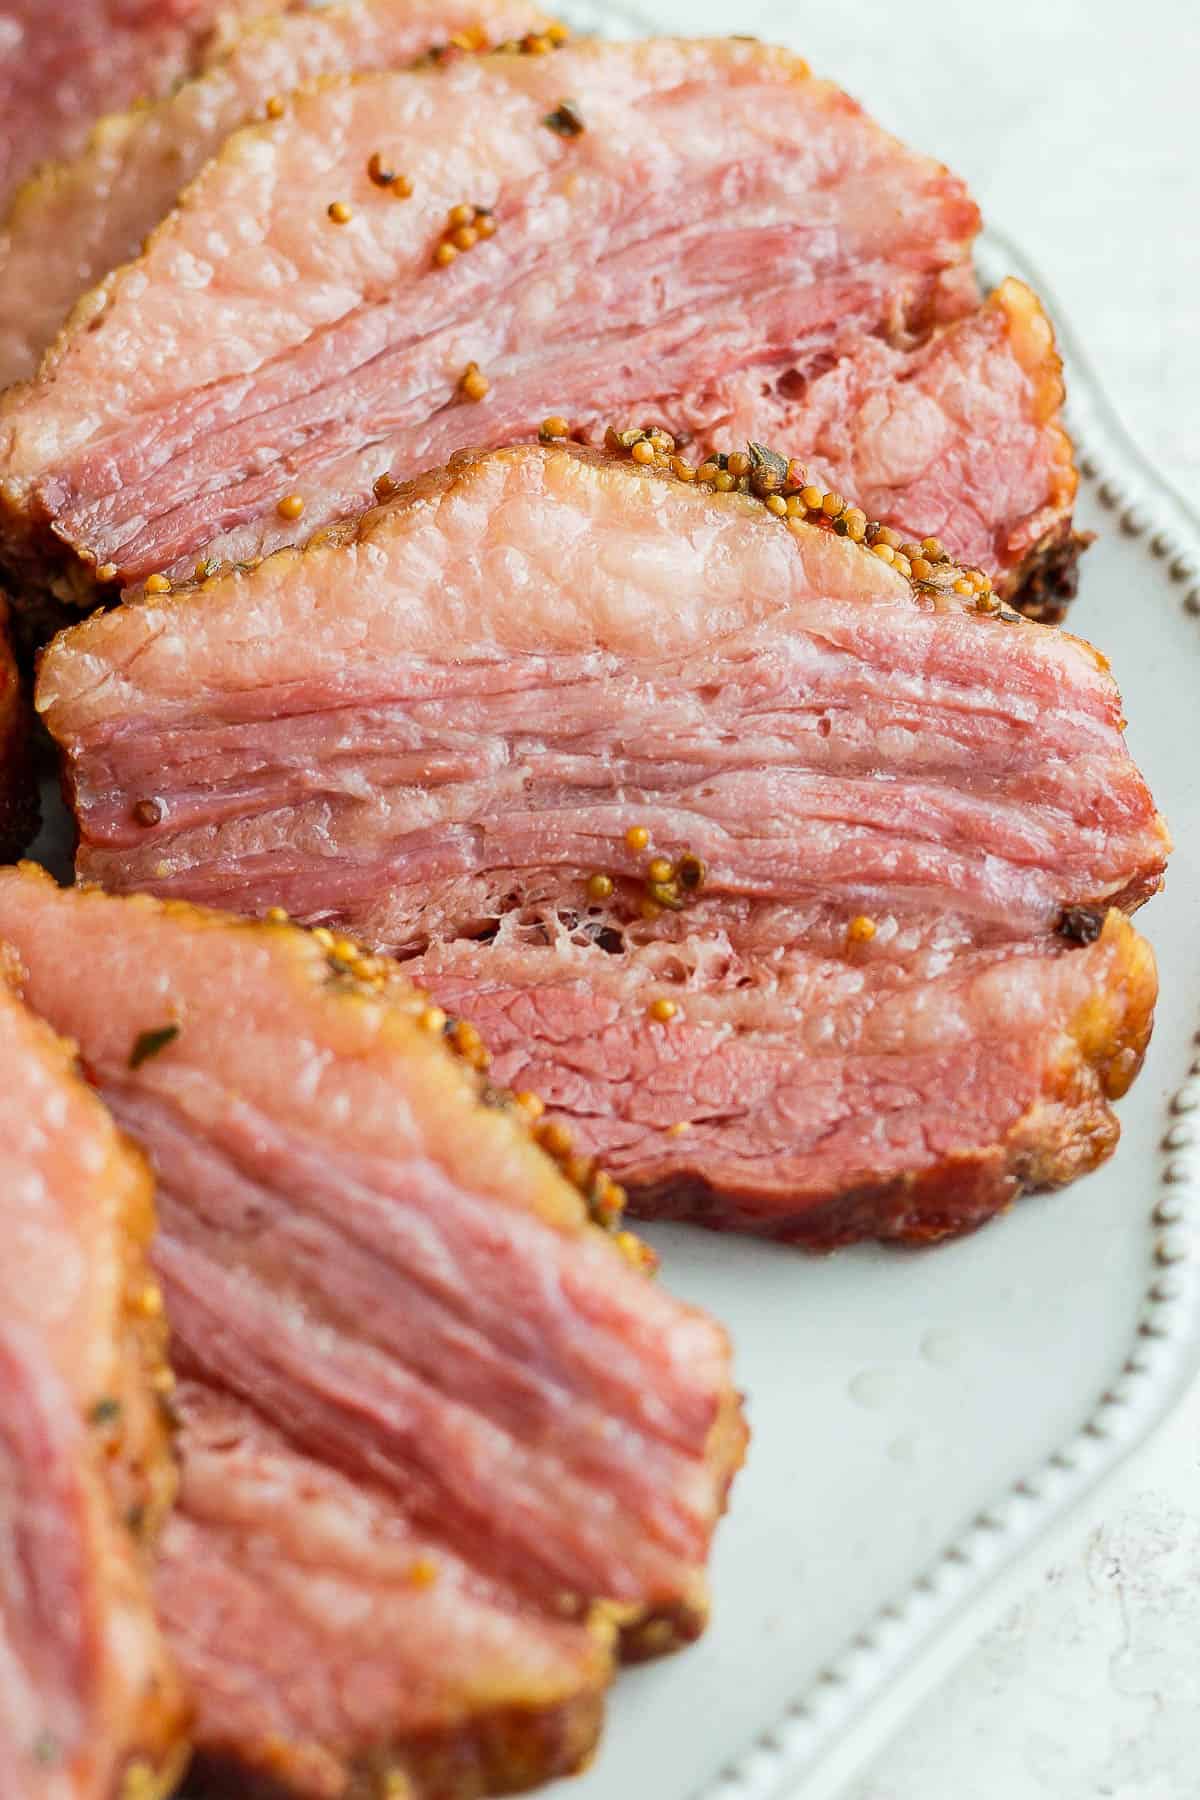 Slices of smoked corned beef on a white plate.